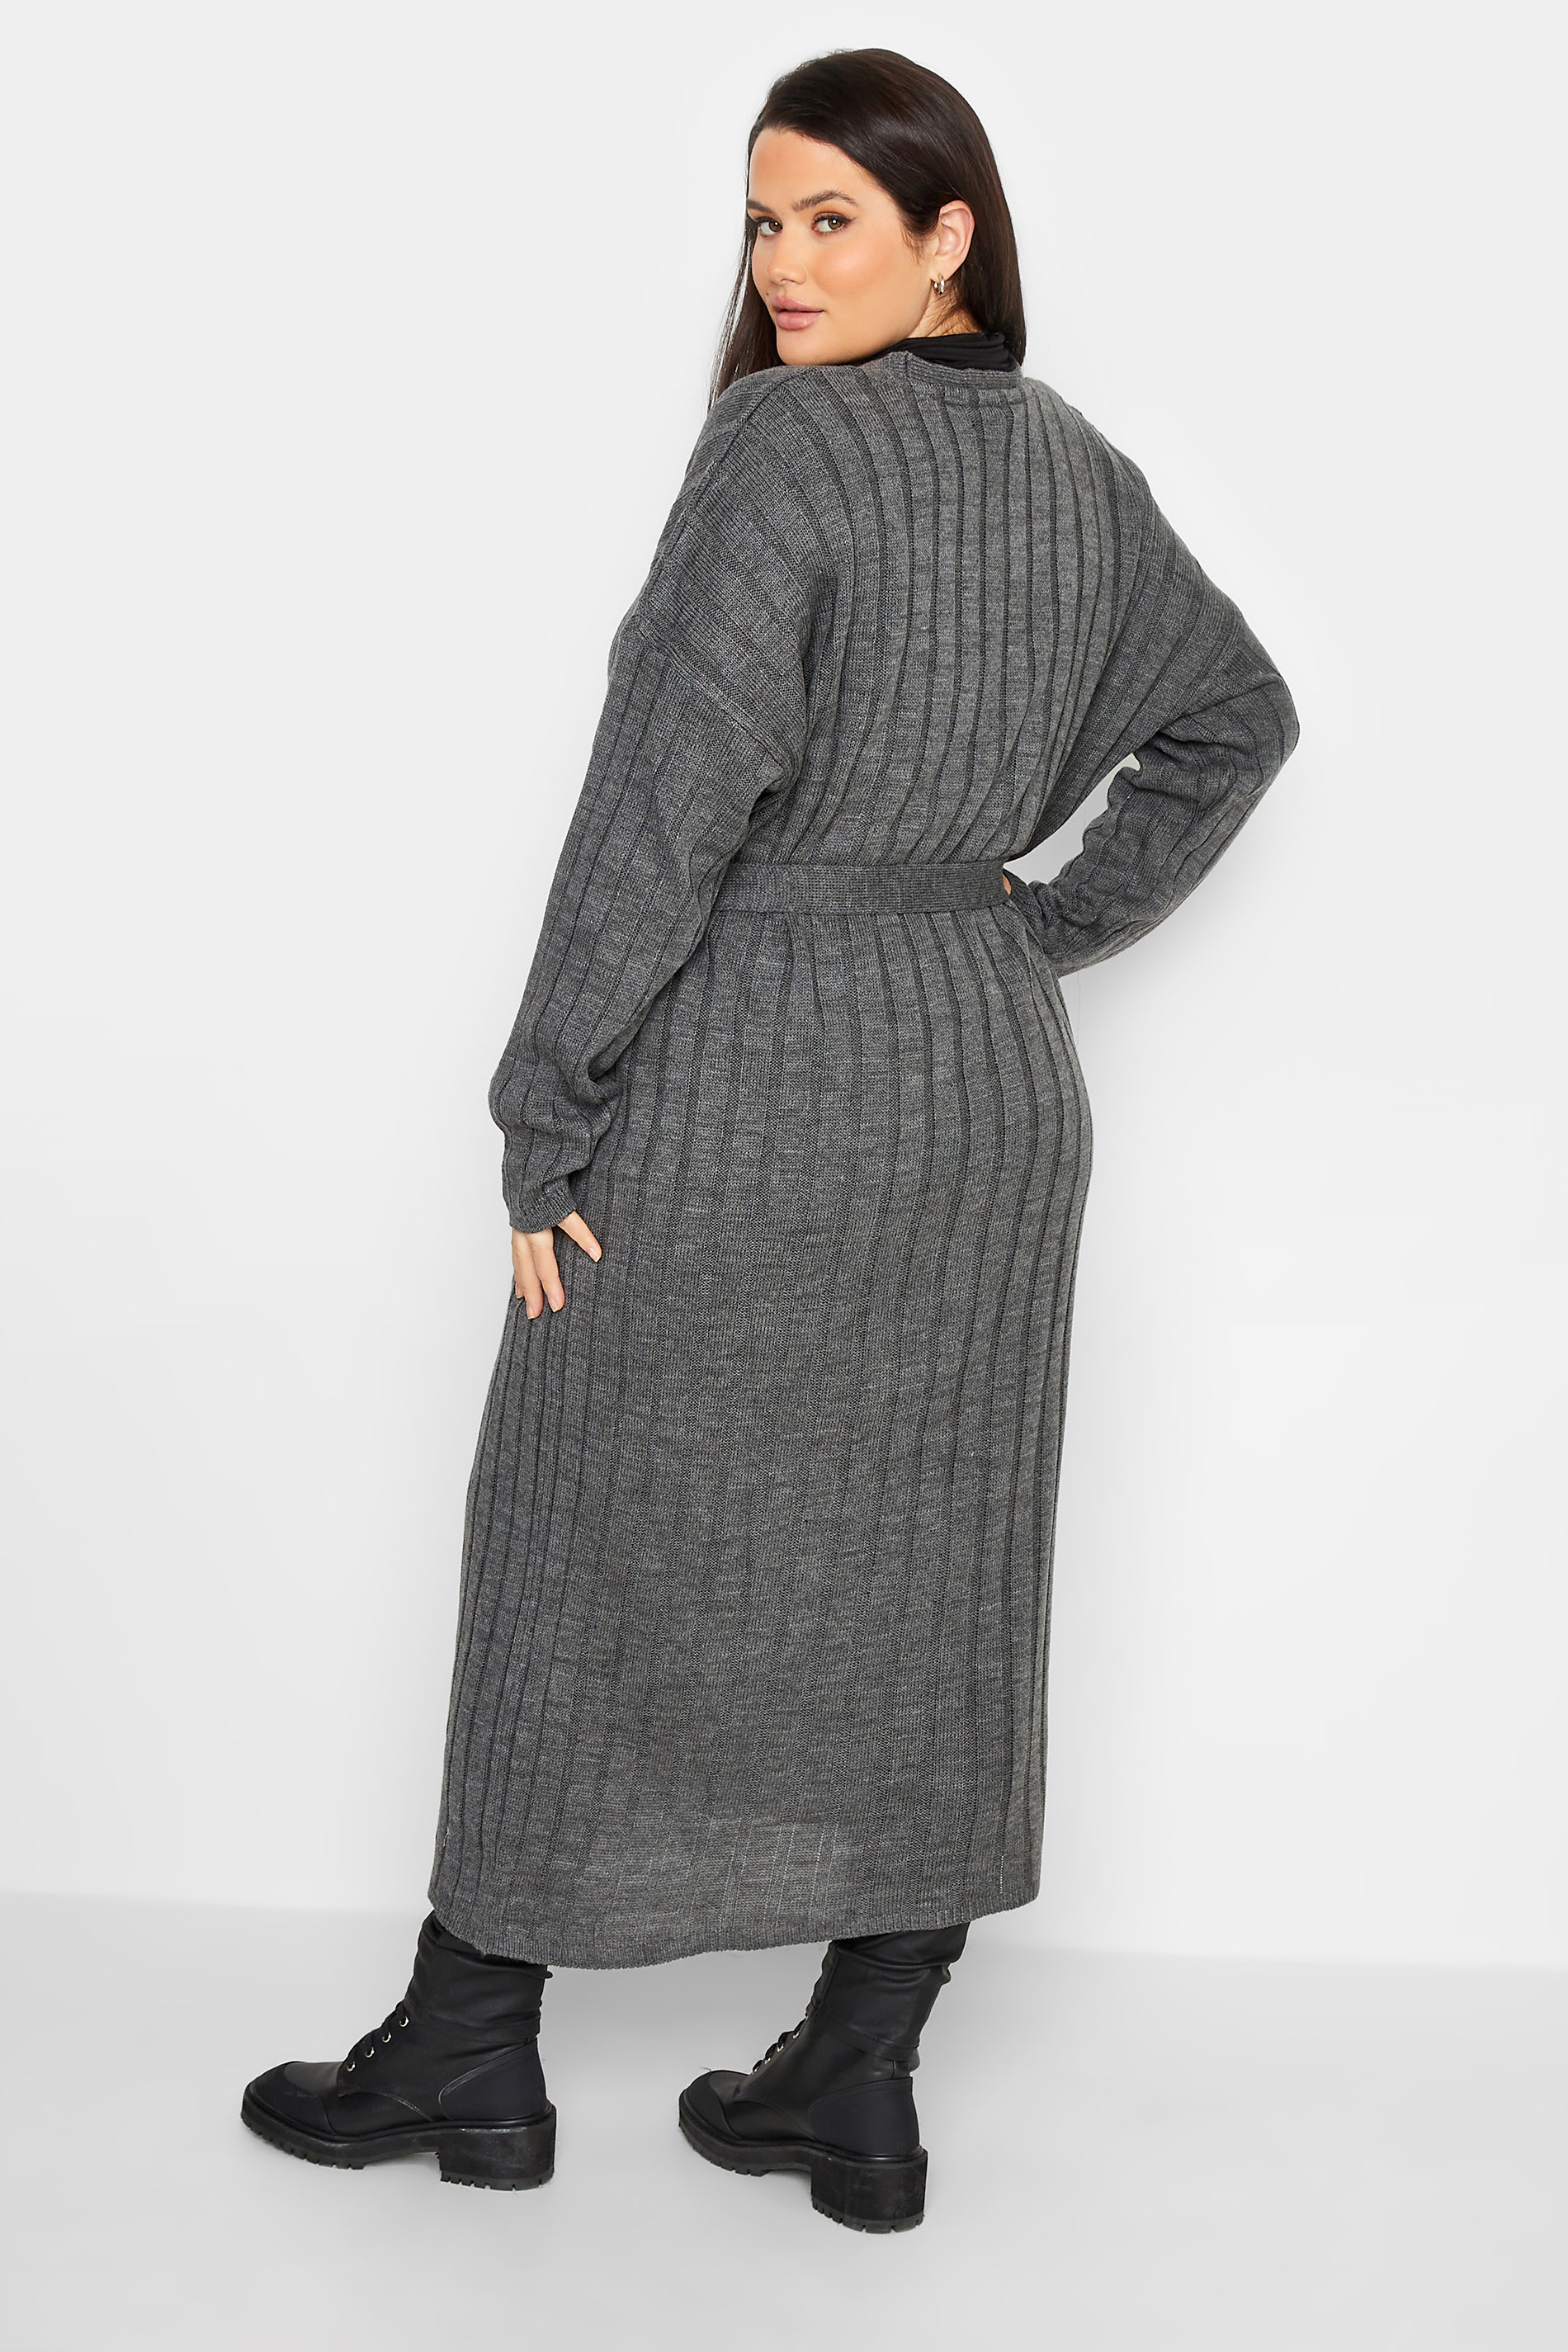 LTS Tall Women's Grey Marl Belted Knitted Maxi Cardigan | Long Tall Sally 3